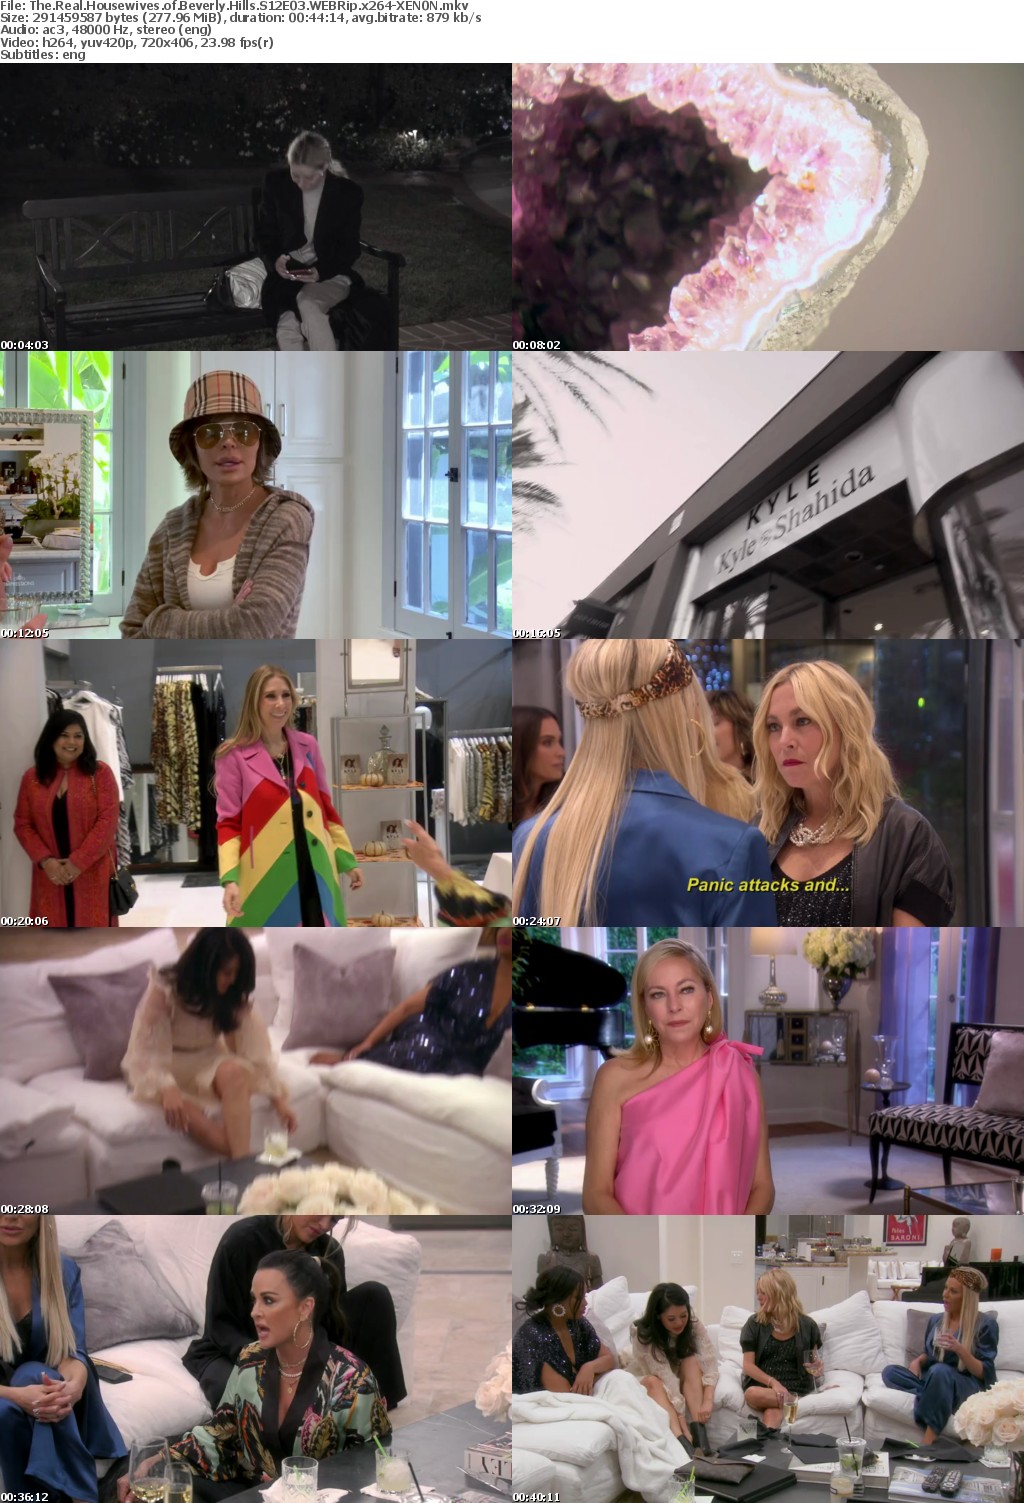 The Real Housewives of Beverly Hills S12E03 WEBRip x264-XEN0N